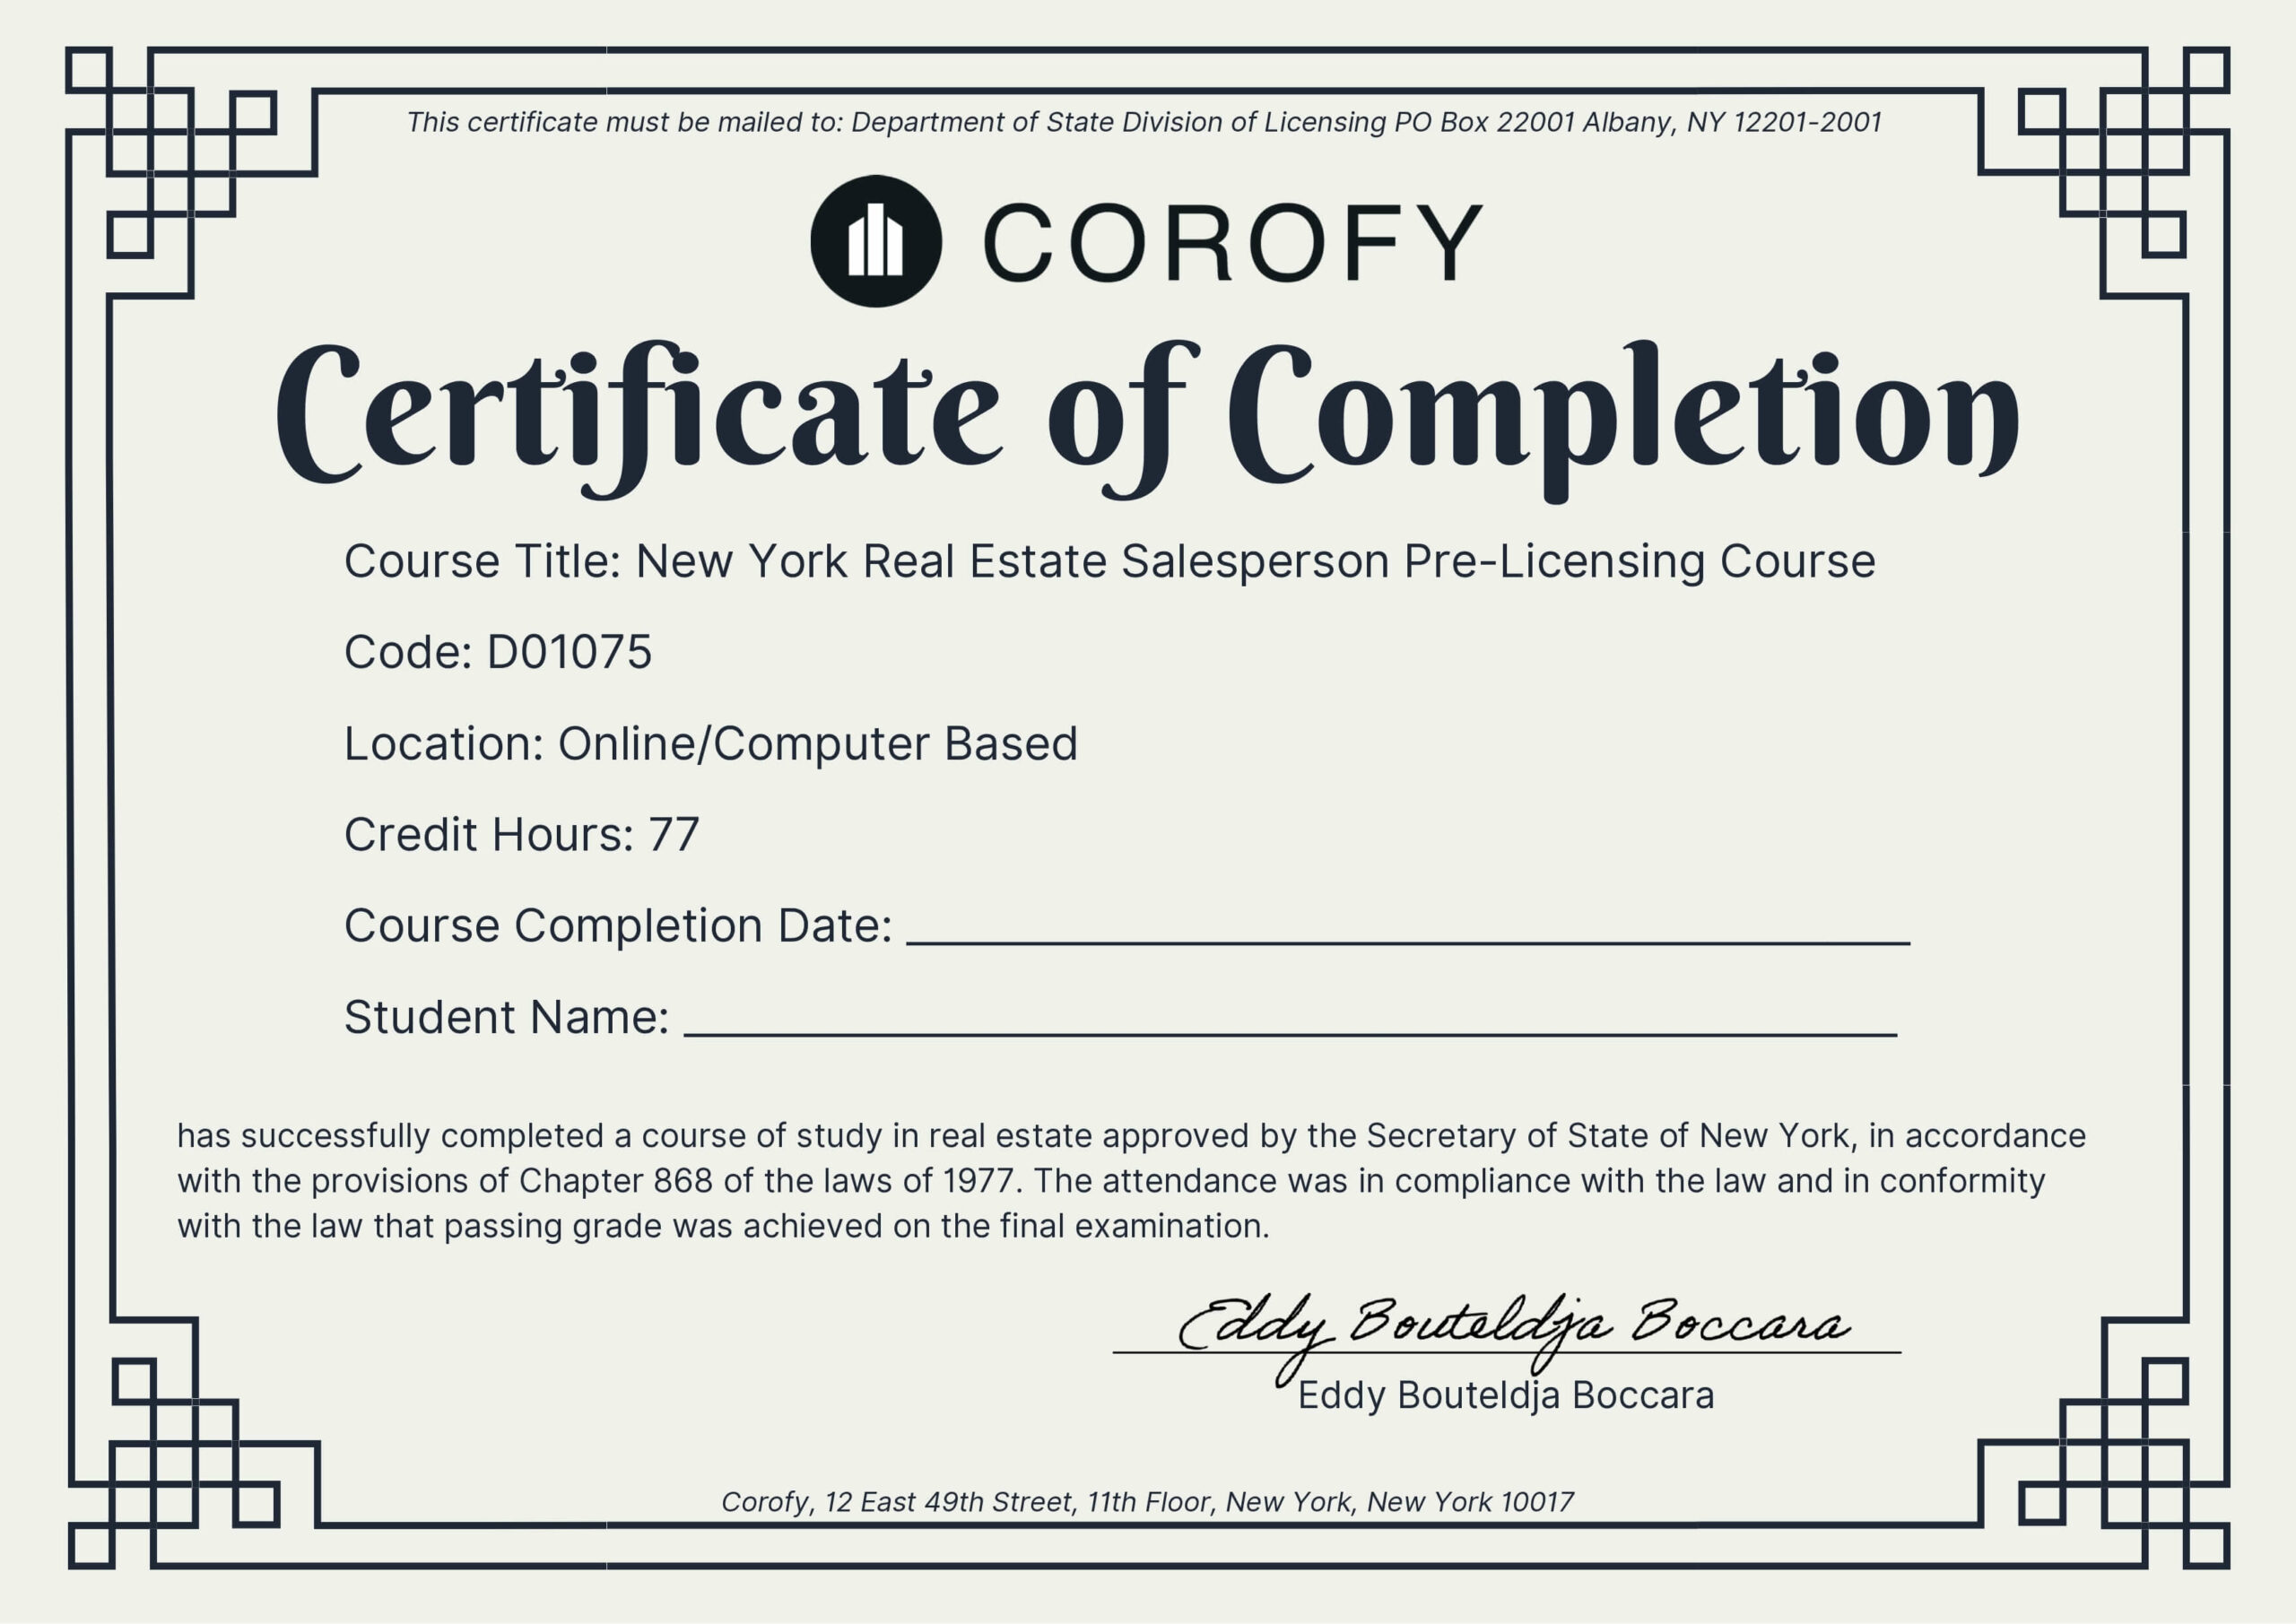 New-York-77-Hour-Pre-Licensing-Certificate-of-Completion-scaled.jpg